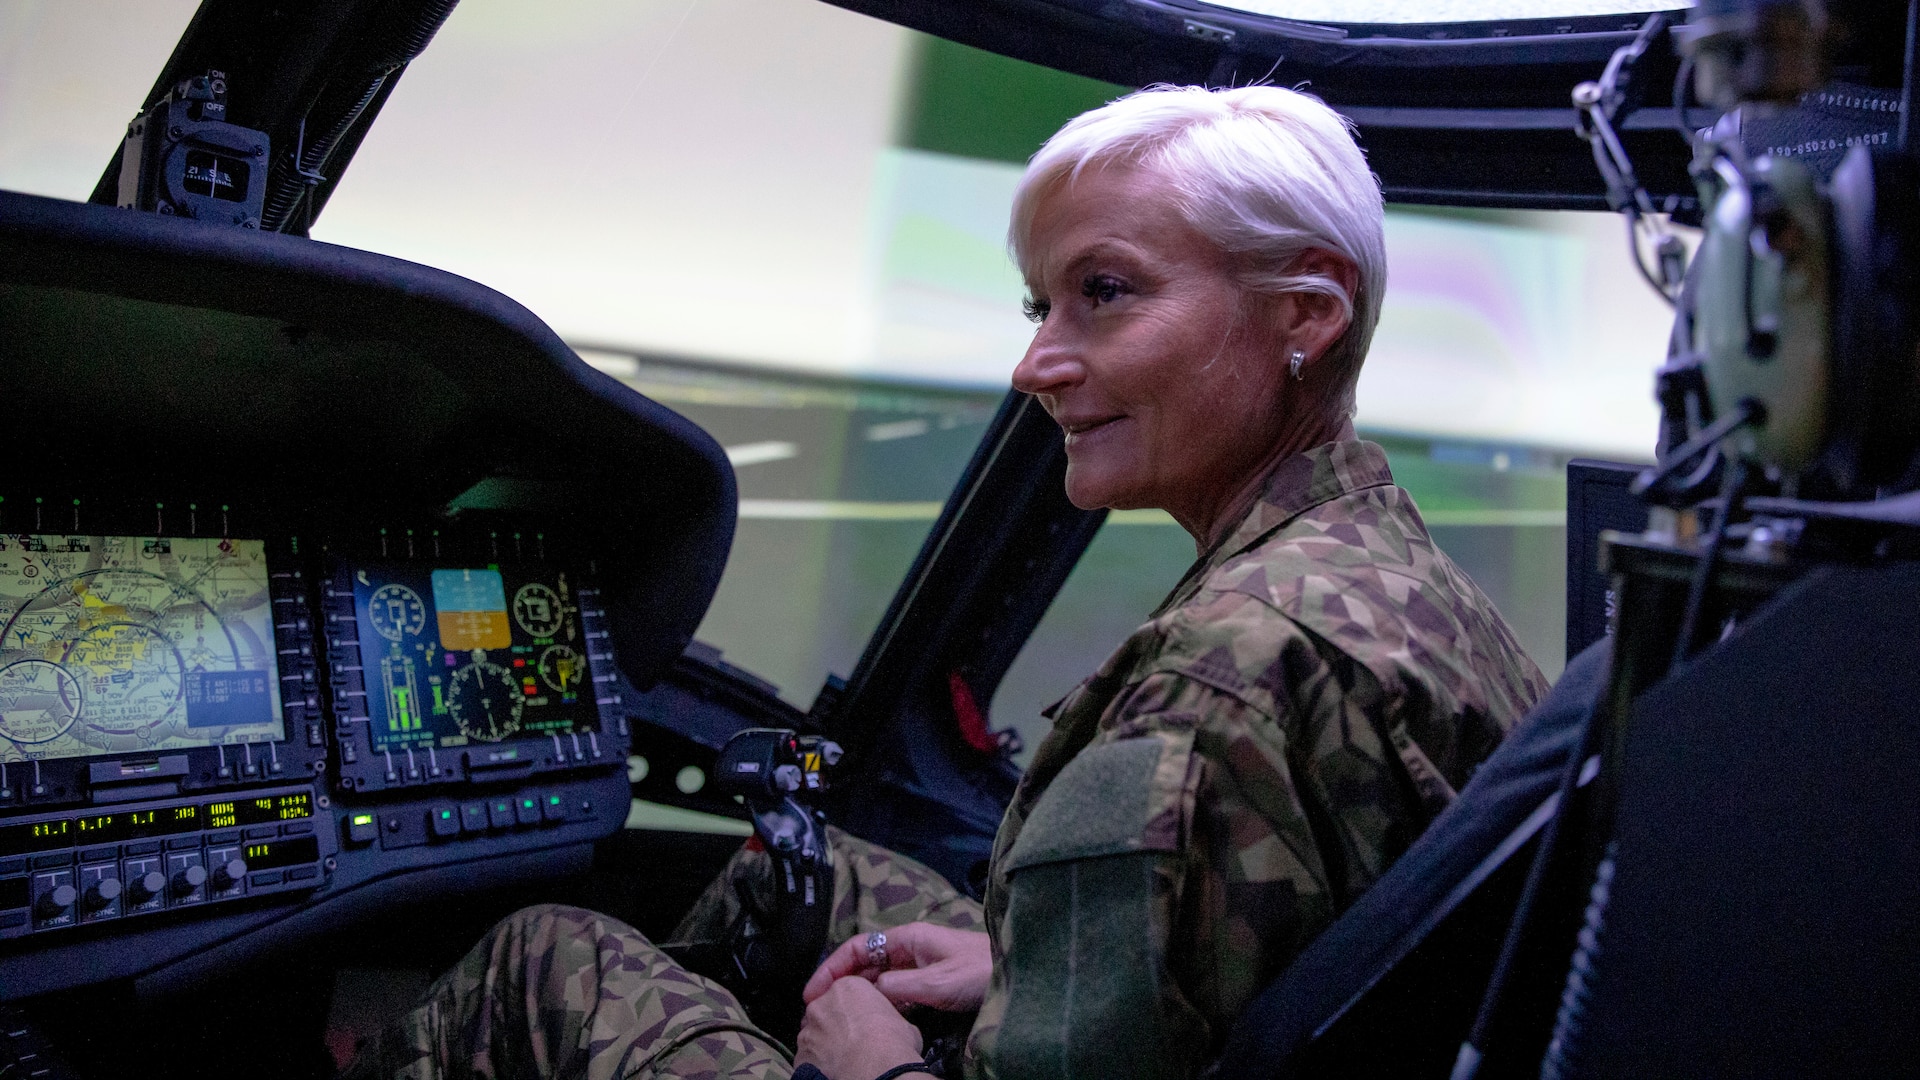 Latvian National Armed Forces Col. Ilze Žilde sits in a UH60 Black Hawk aircrew trainer assigned to the 3rd Battalion, 238th Aviation Regiment, General Support Aviation Battalion, Michigan Army National Guard, at the Army Aviation Support Facility in Grand Ledge, Michigan, May 25, 2021. Leaders of the Latvian military toured Michigan National Guard facilities as part of the State Partnership Program.